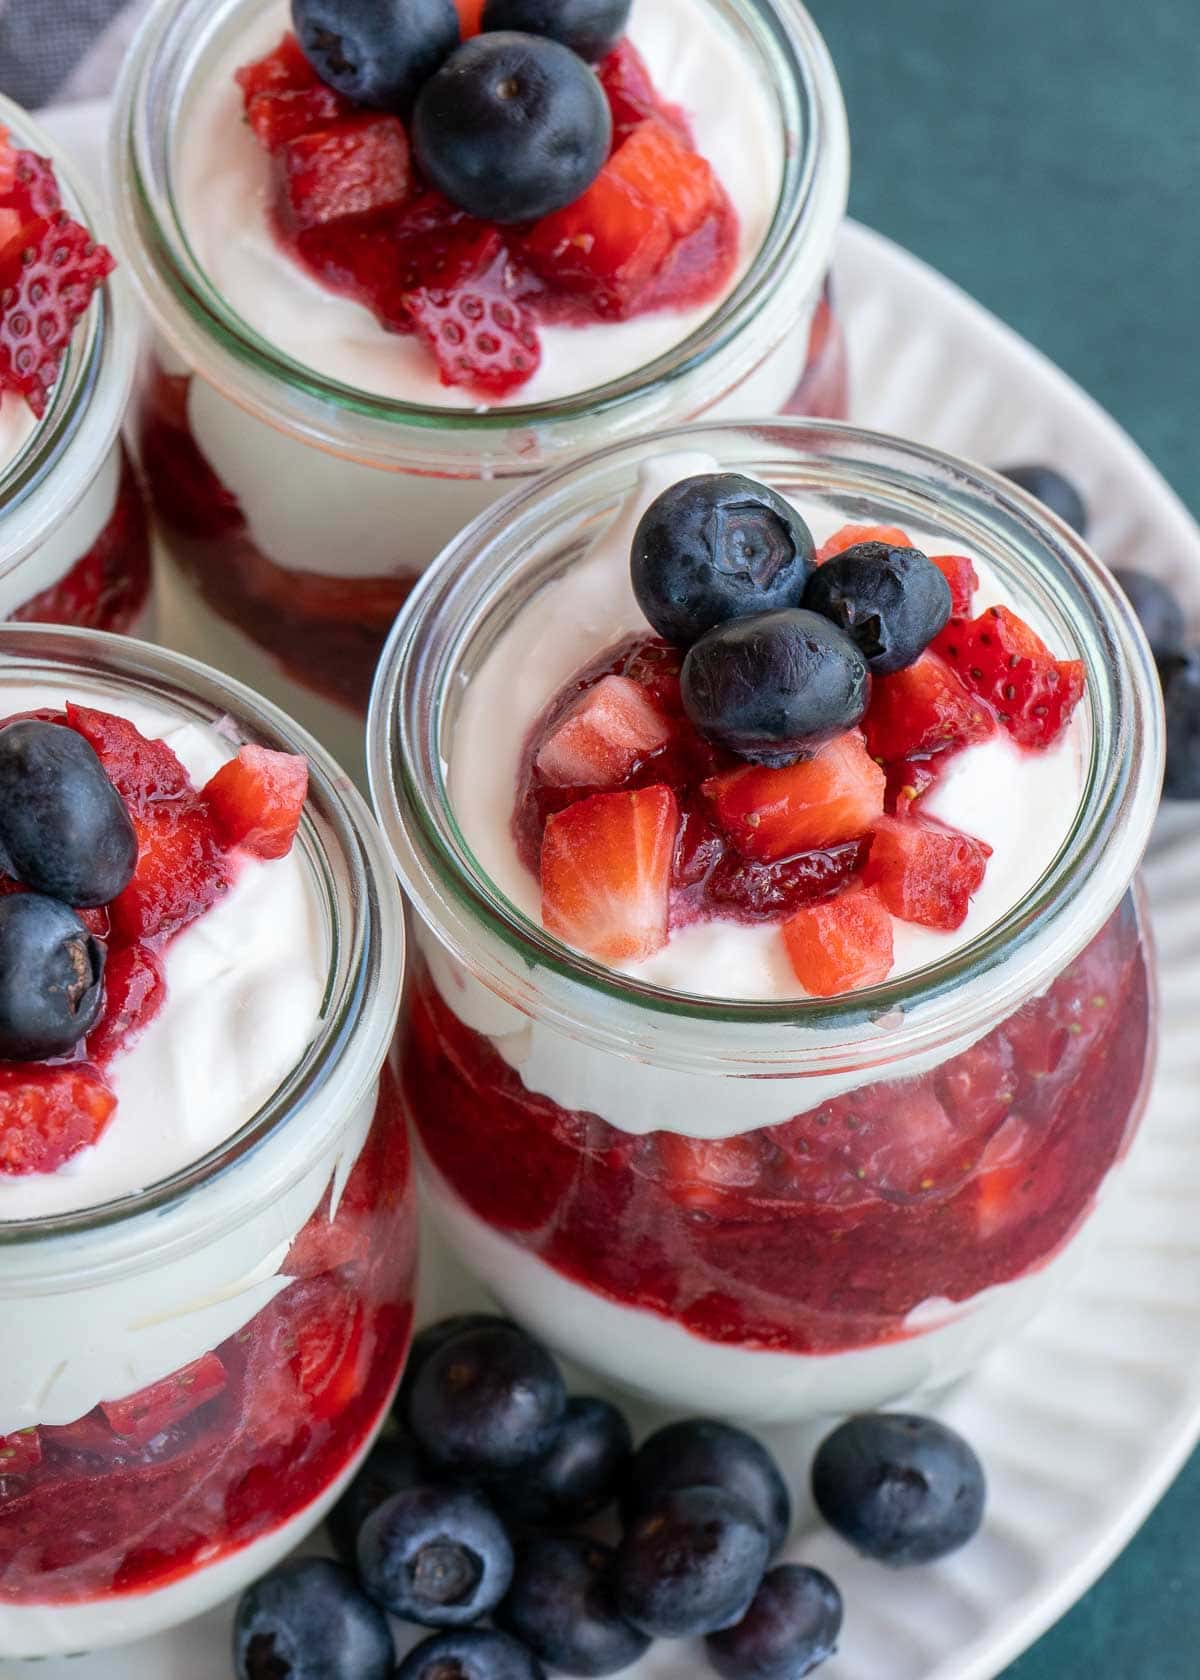 This festive No Bake Cheesecake Parfait recipe is the perfect summer treat! An indulgent cheesecake layer is paired with berries for a low-carb dessert perfect for potlucks and parties!